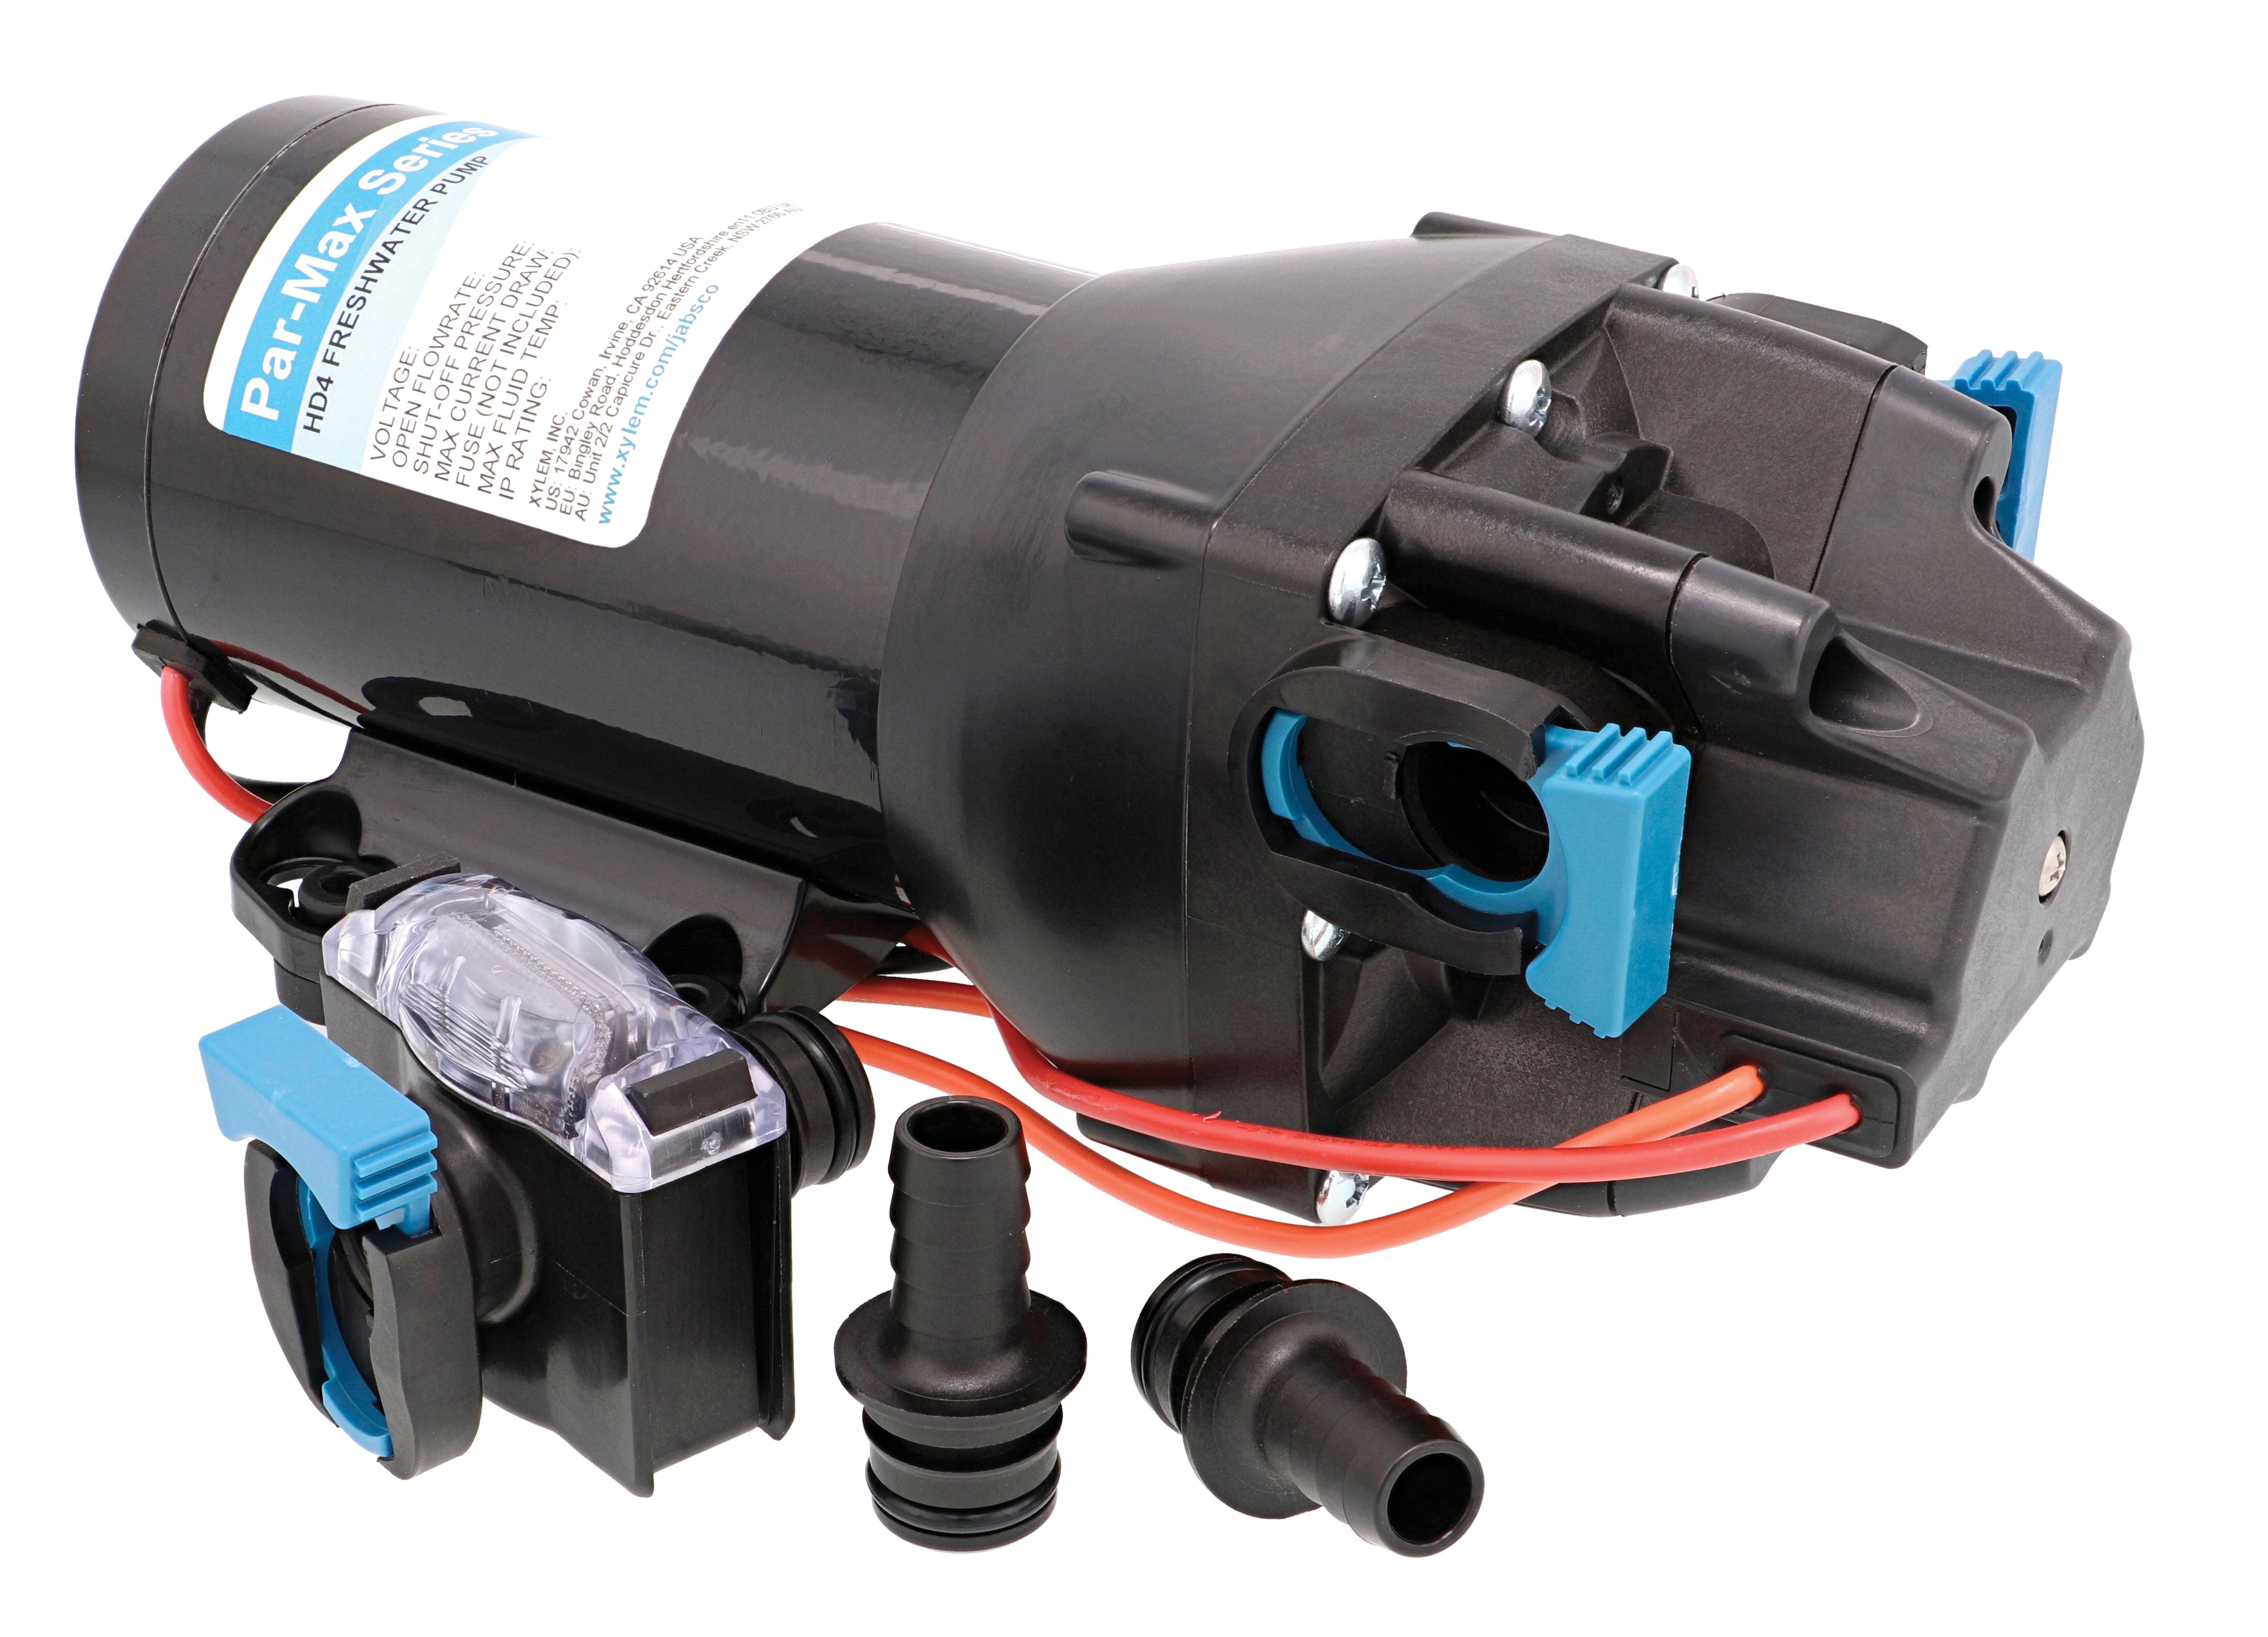 Jabsco Q401J-118S-3A ParMax HD4 Marine Freshwater Delivery Pump - 12V, 4 GPM, 60 PSI Shut-Off